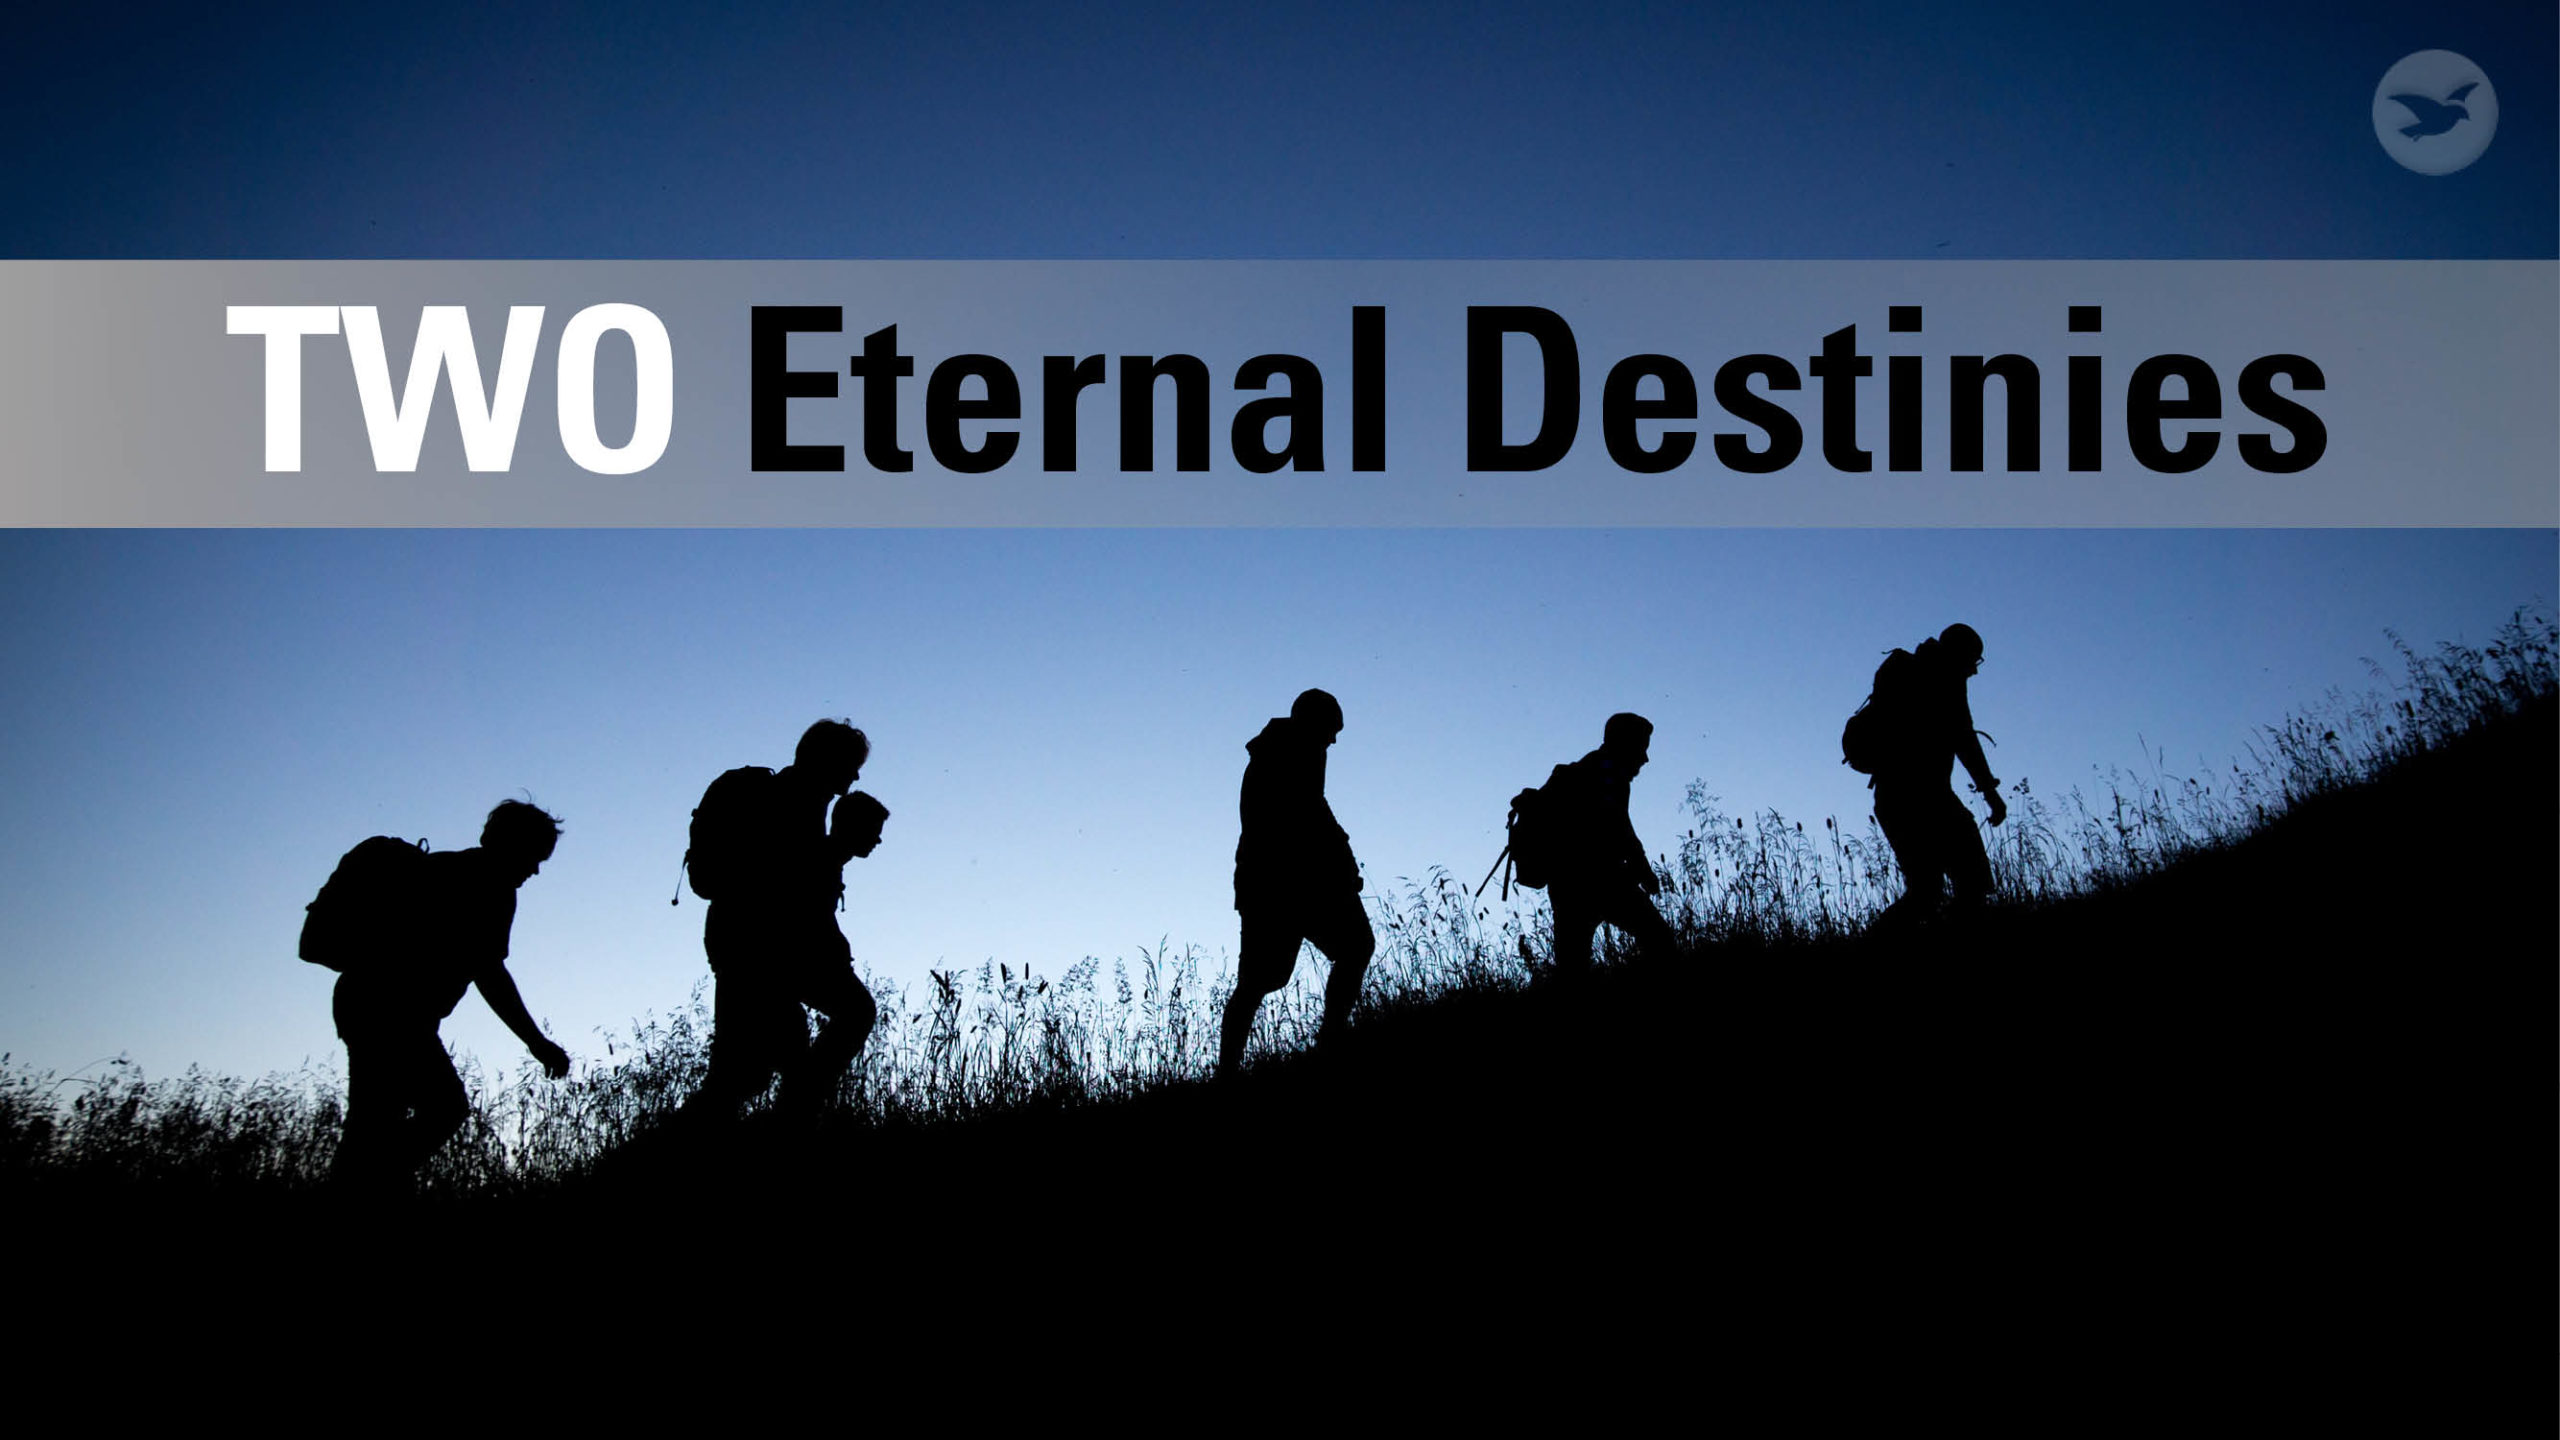 Our eternal destinies will be decided at the coming of the Lord Jesus. The choices we make now will determine what our destiny will be.